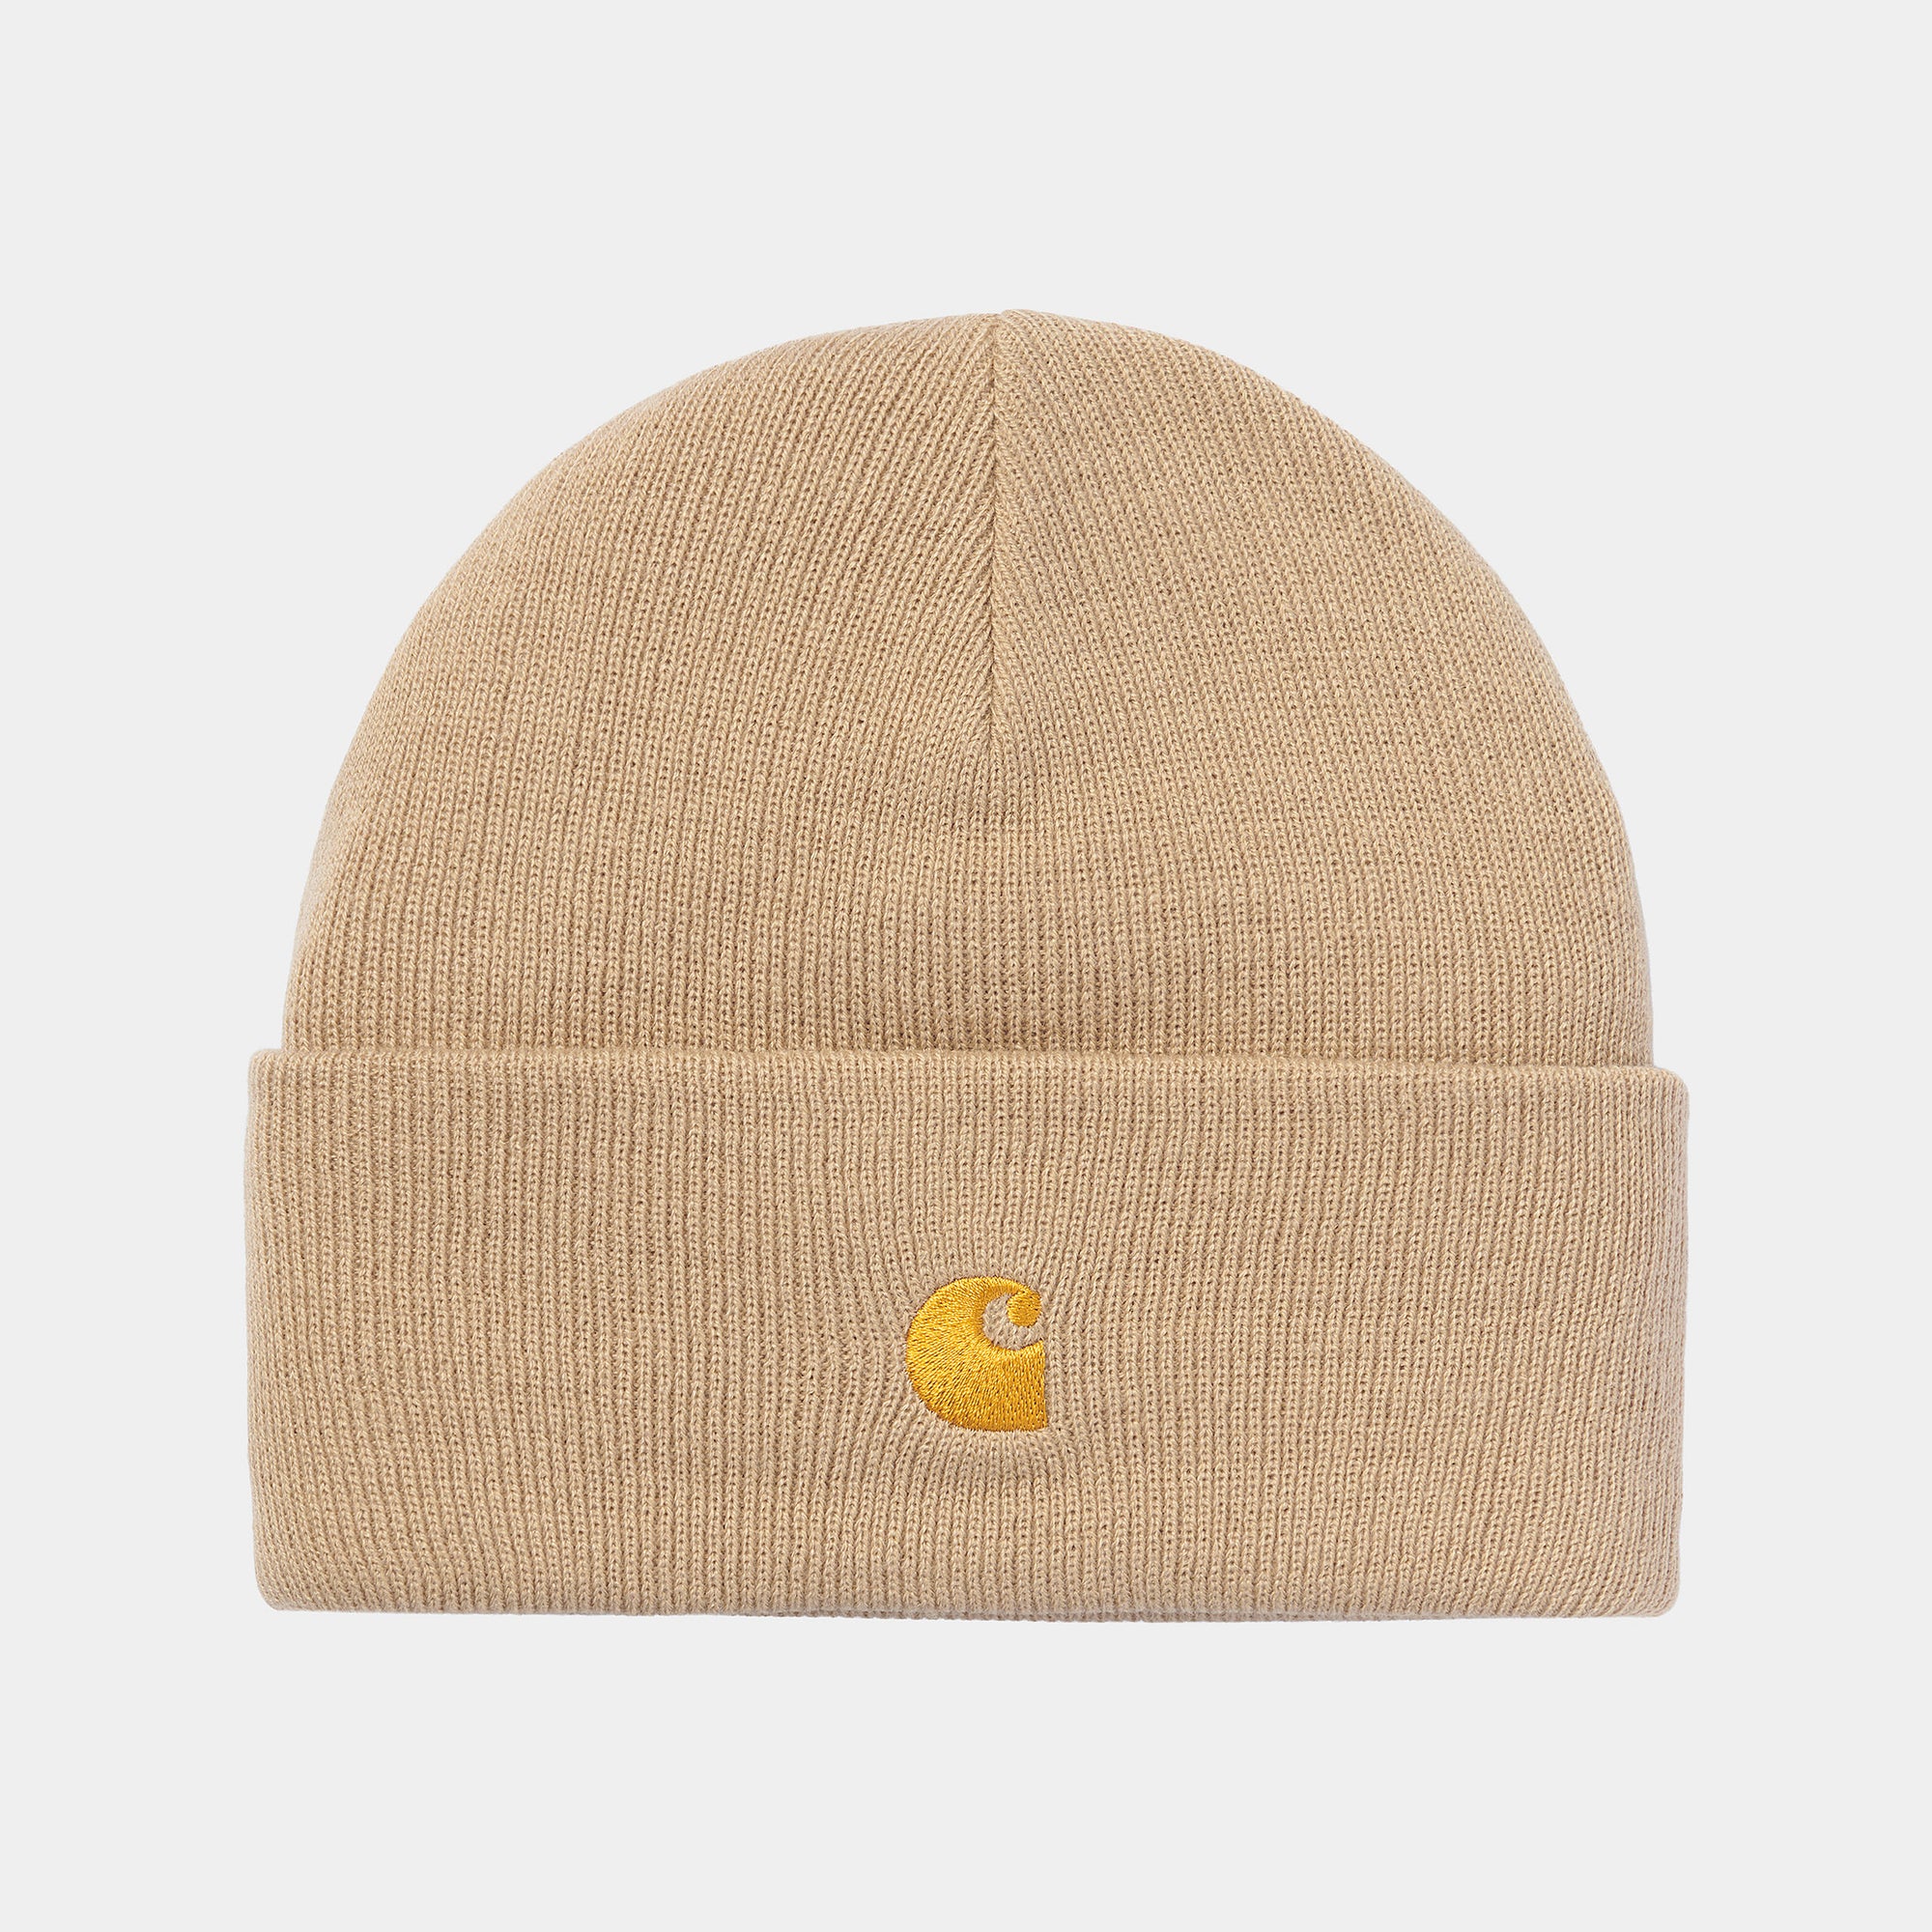 Carhartt WIP Chase Beanie - Sable / Gold